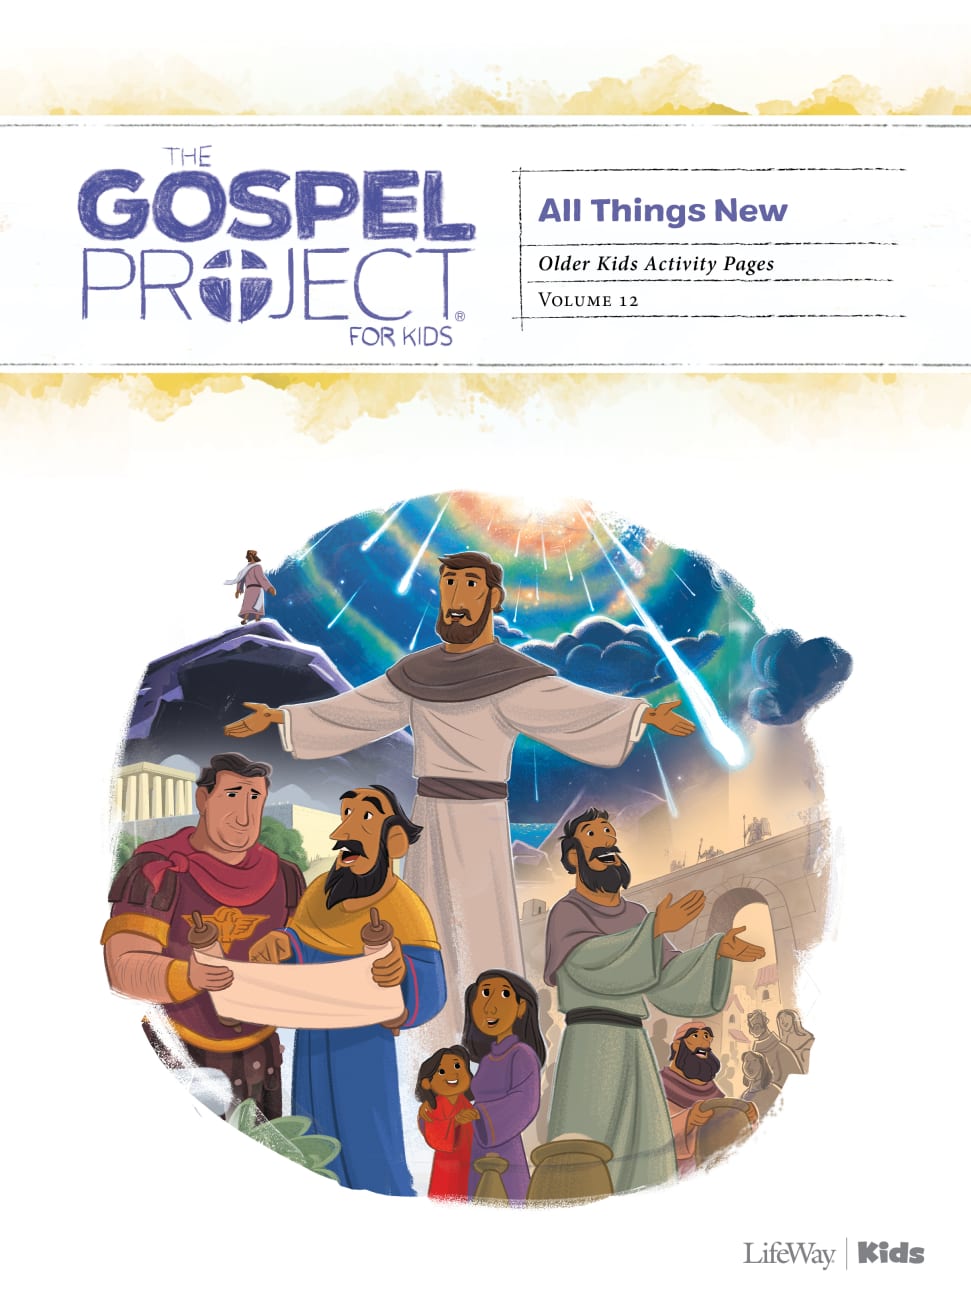 All Things New (Older Kids Activity Pages) (#12 in The Gospel Project For Kids Series) Paperback